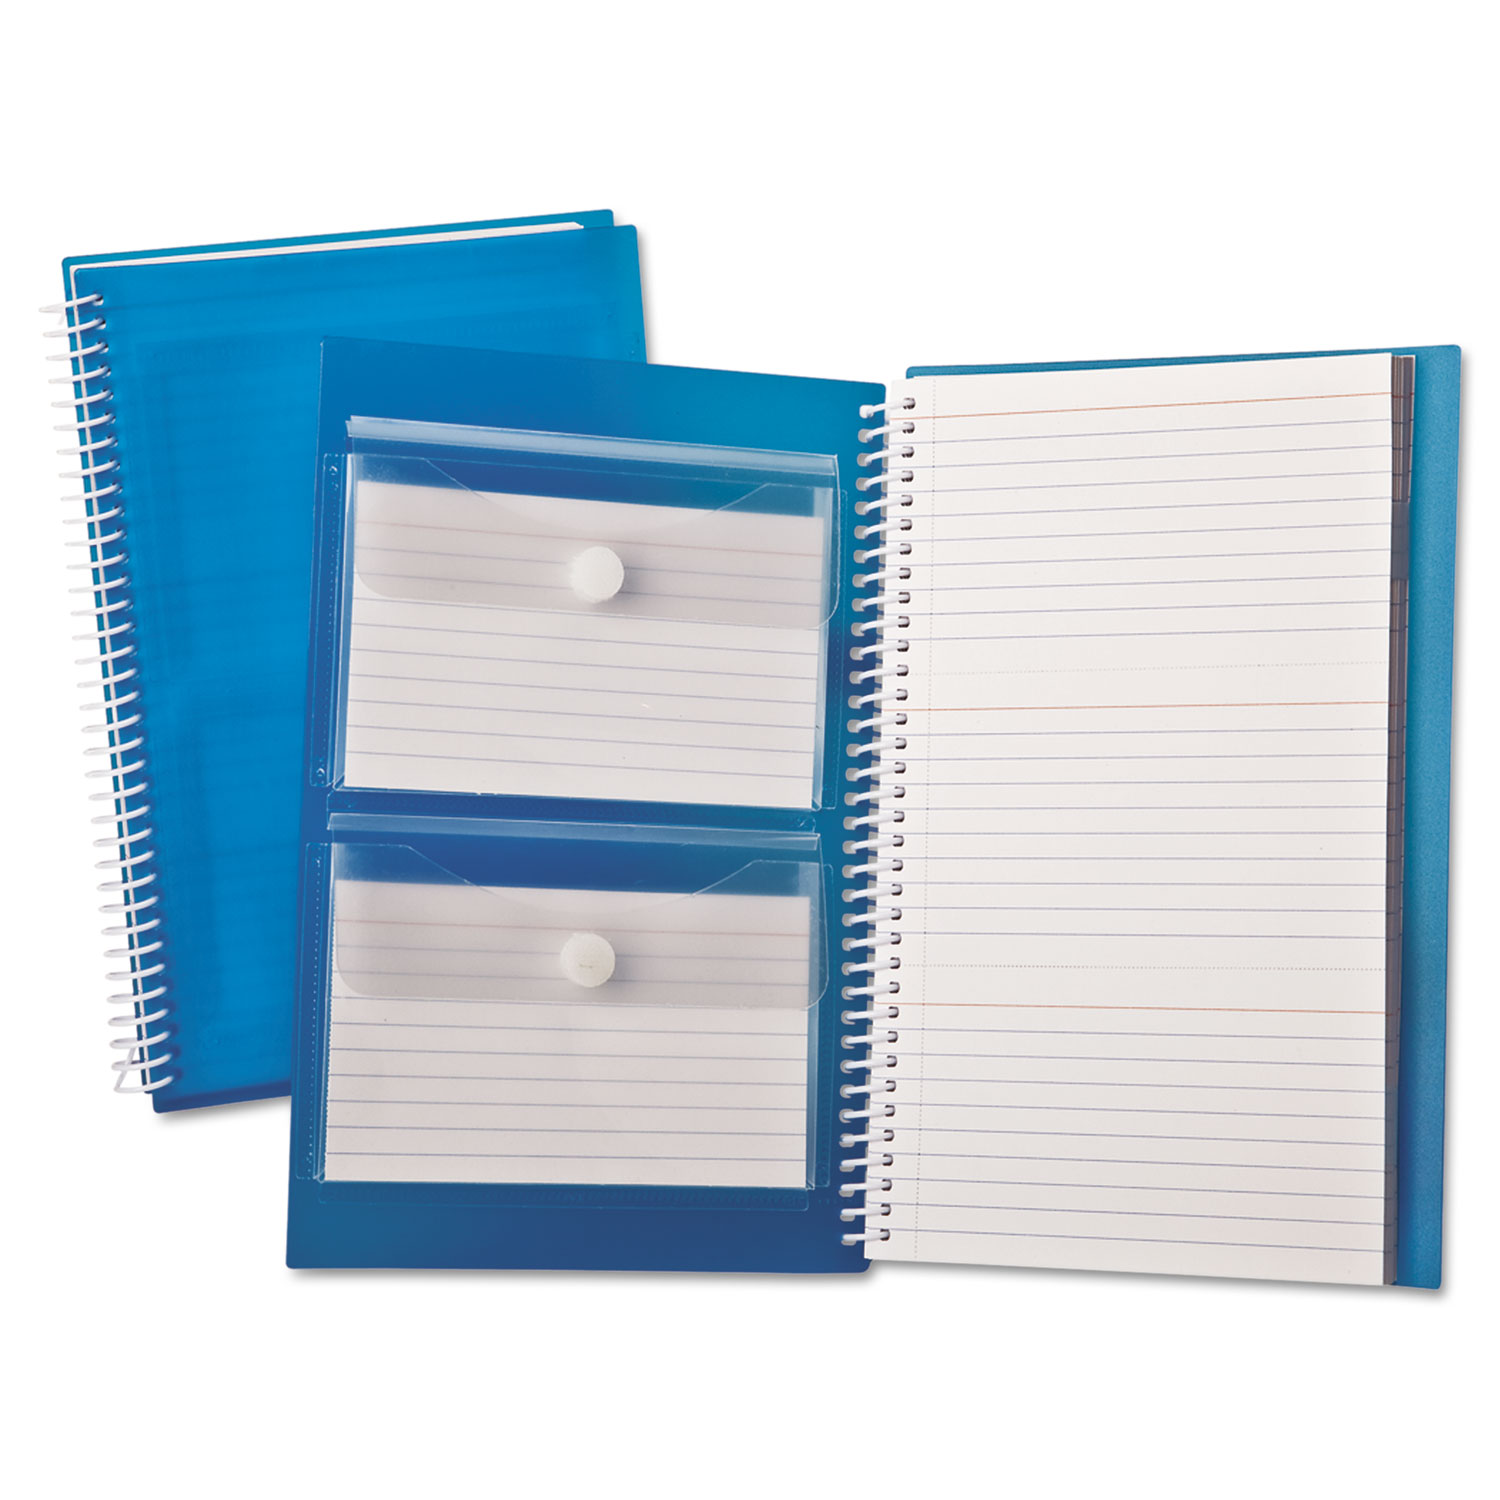  Oxford 40288 Index Card Notebook, Ruled, 3 x 5, White, 150 Cards per Notebook (OXF40288) 